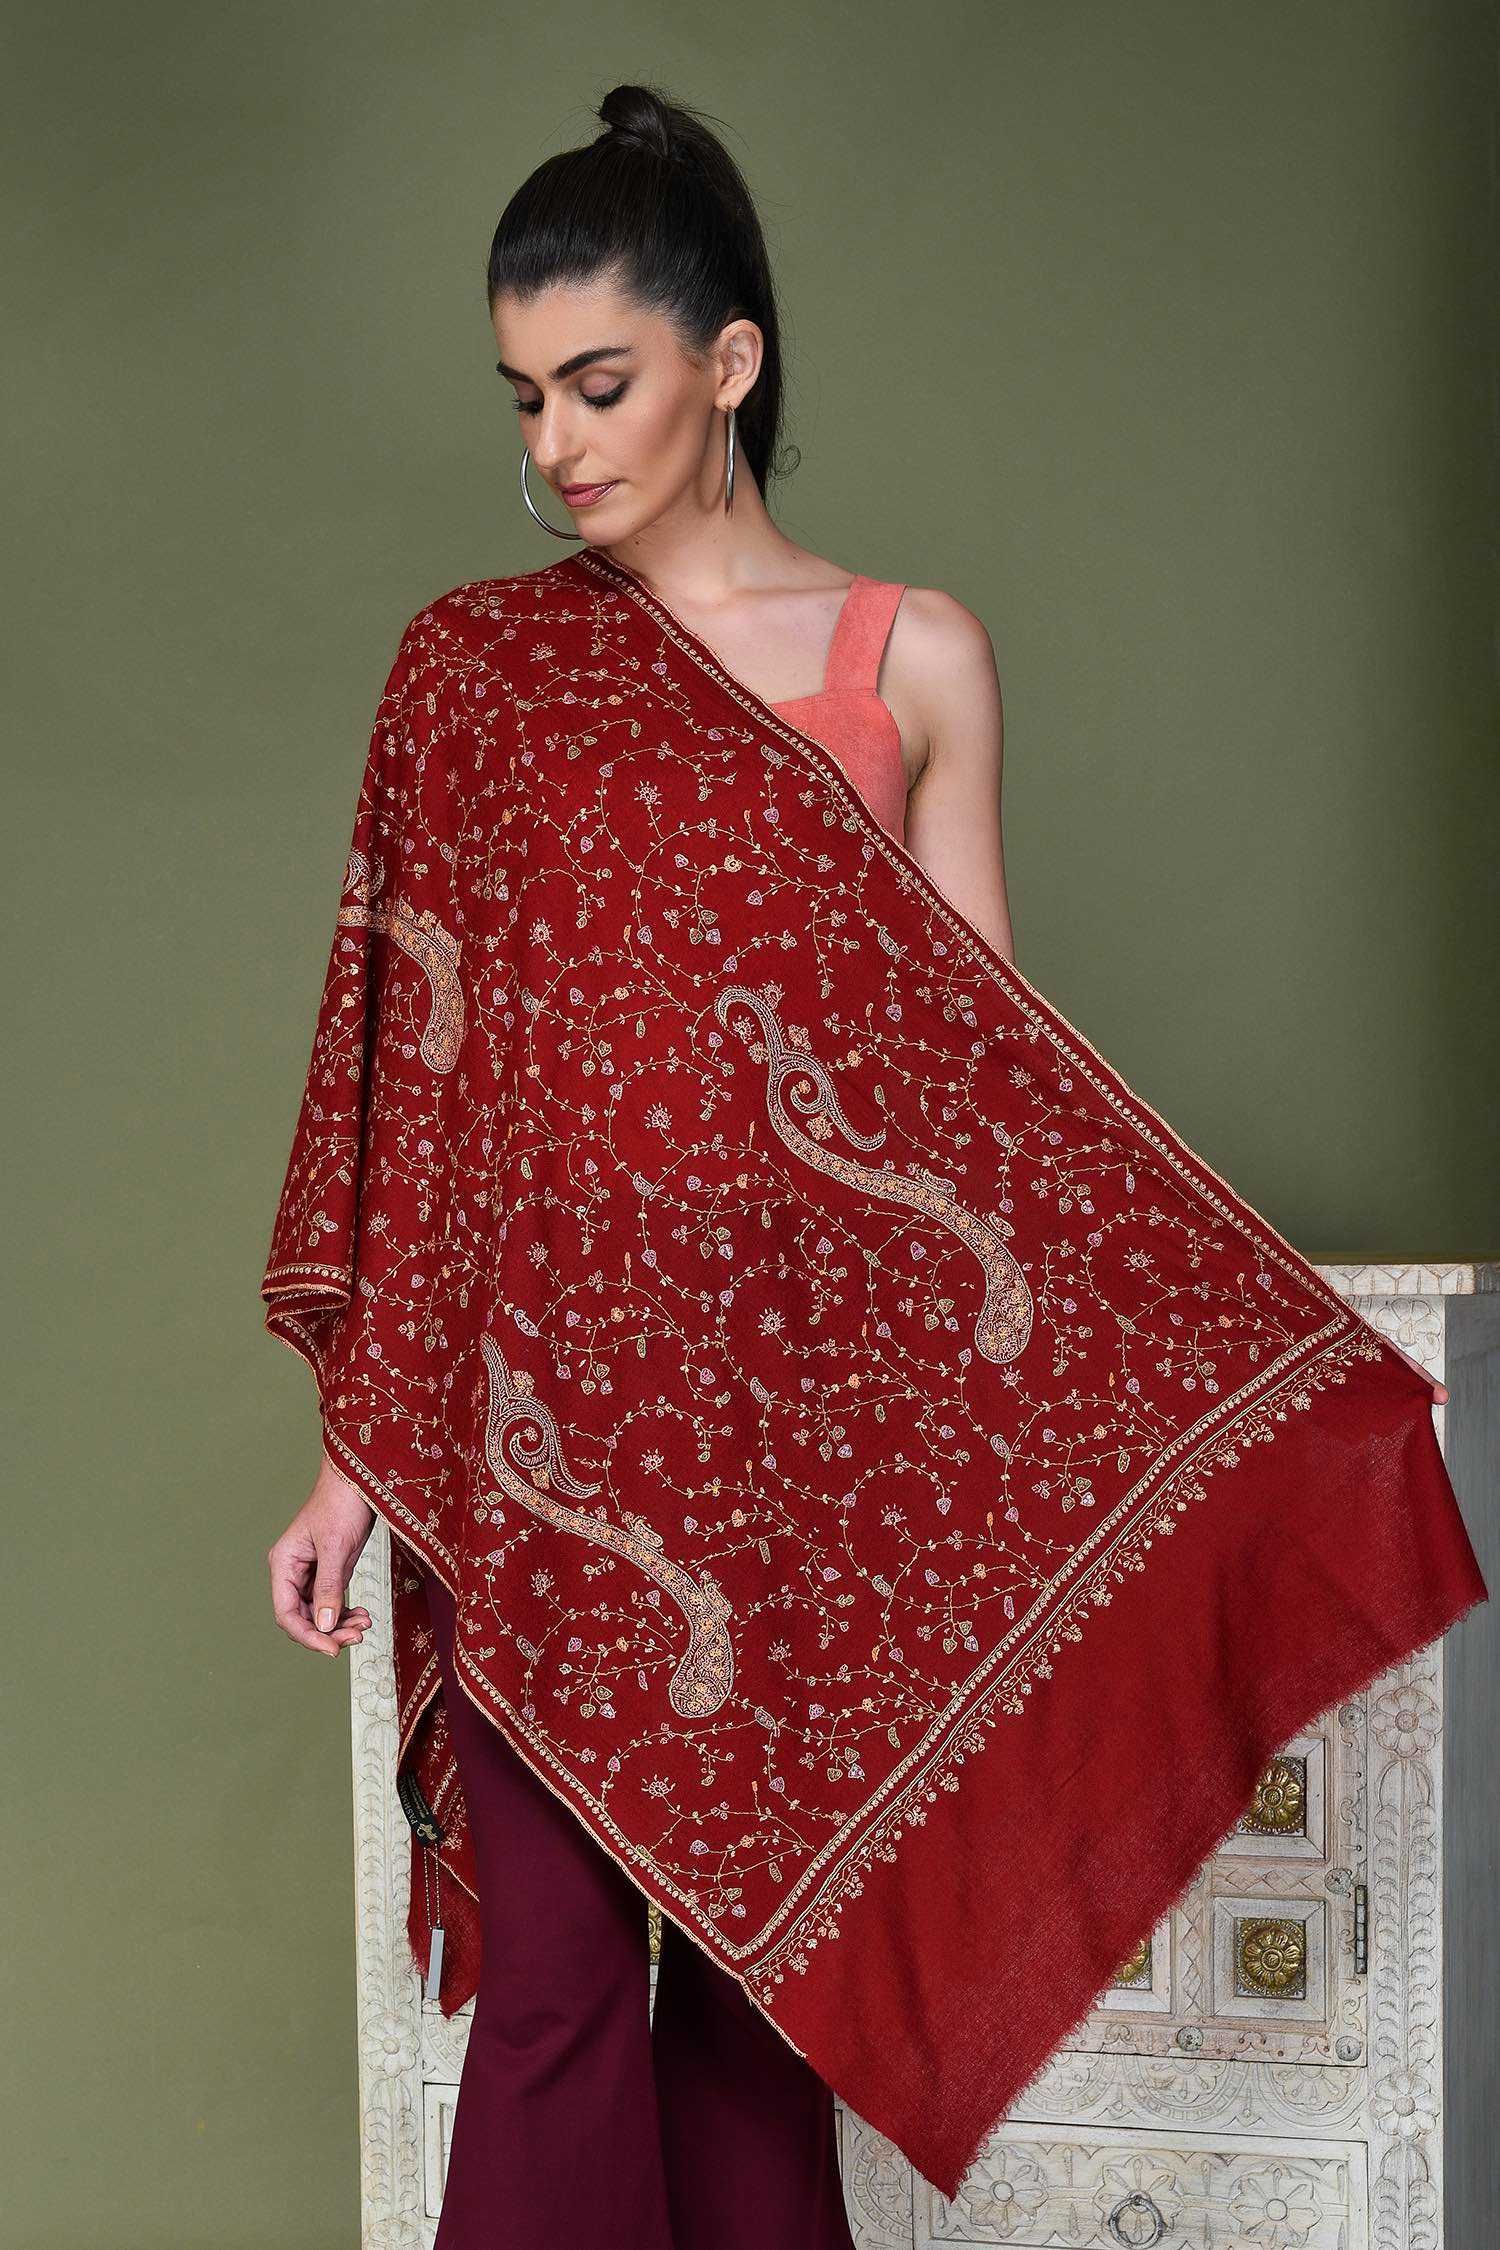 Blood Red Handmade Embroidered Cashmere Wrap